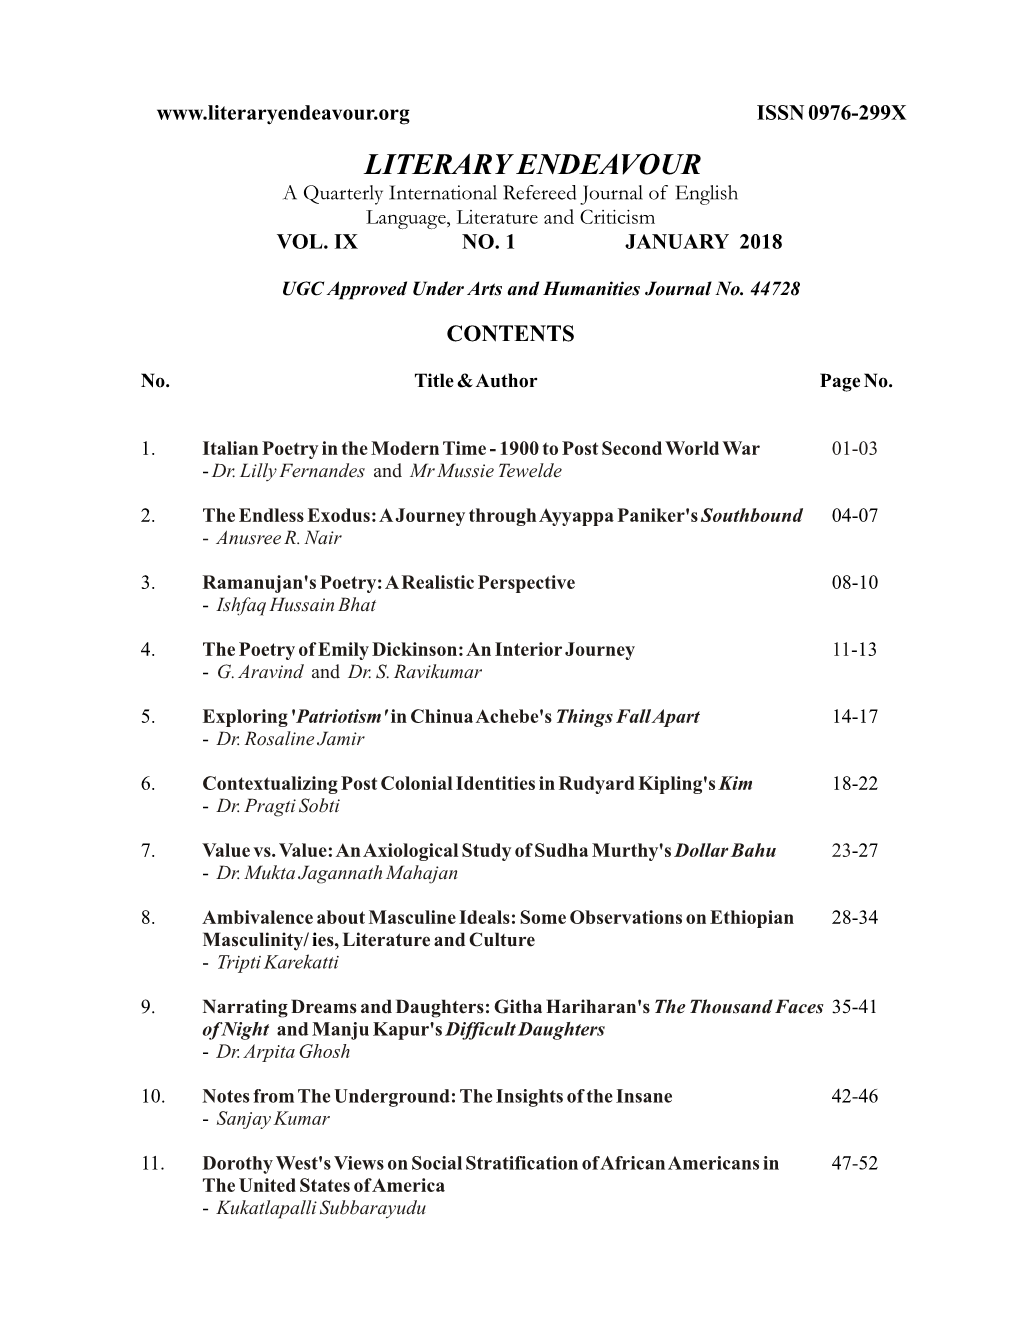 LITERARY ENDEAVOUR a Quarterly International Refereed Journal of English Language, Literature and Criticism VOL